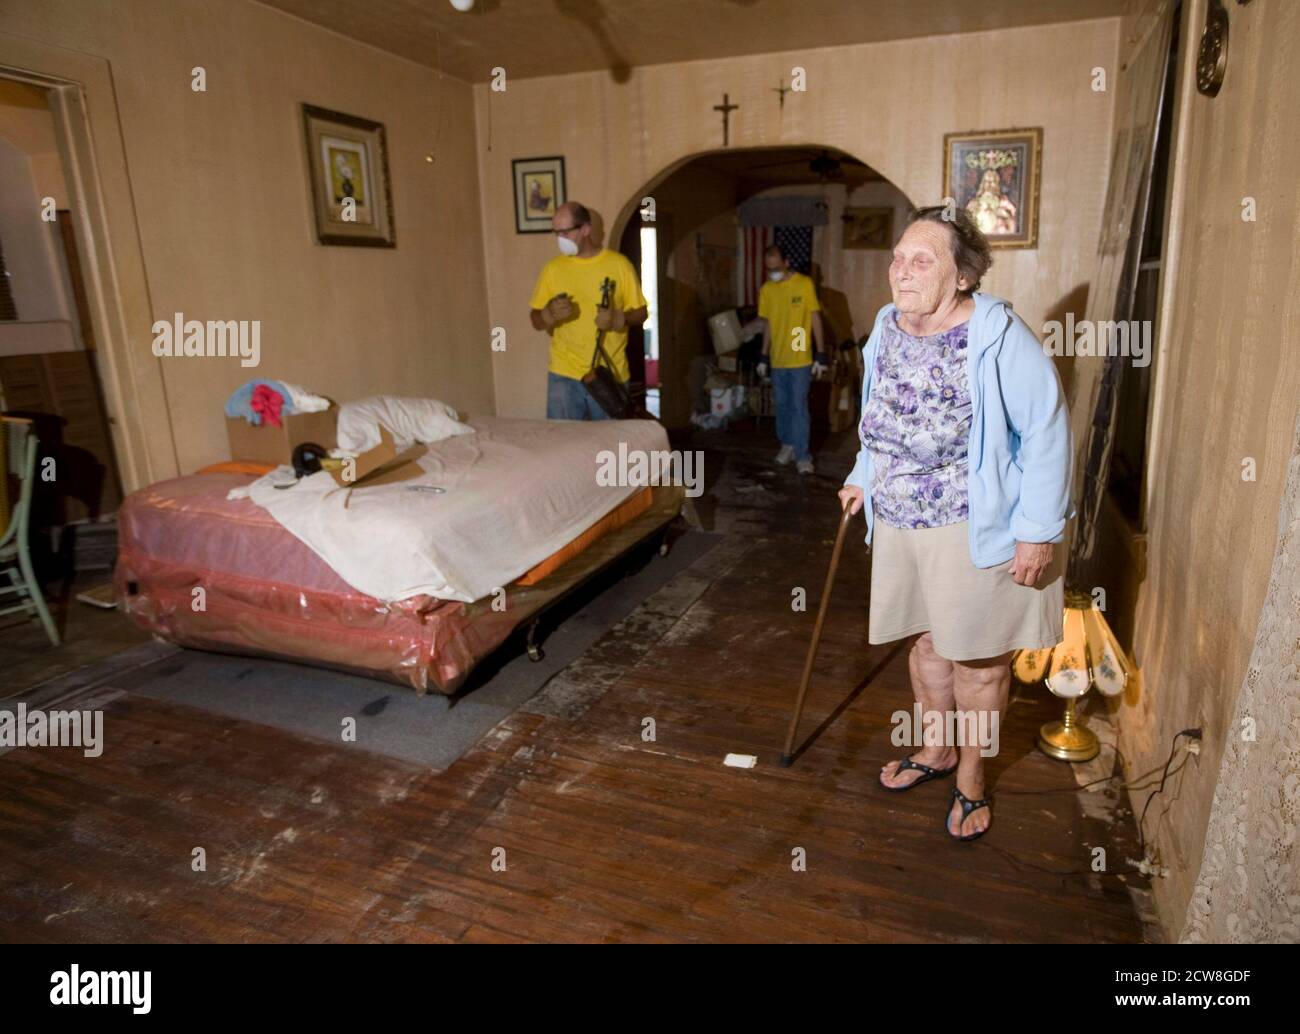 Galveston, TX September 27, 2008: More than two weeks after Hurrican Ike ravaged Galveston Island and east Texas, some Galveston residents are still living in squalor conditions. Patricia Aguilar, 75, of 1911 Avenue N on the east side, has been sleeping on a damp and moldy mattress until volunteers from a church group came by to clear her house of rotten food and furnishings. ©Bob Daemmrich Stock Photo